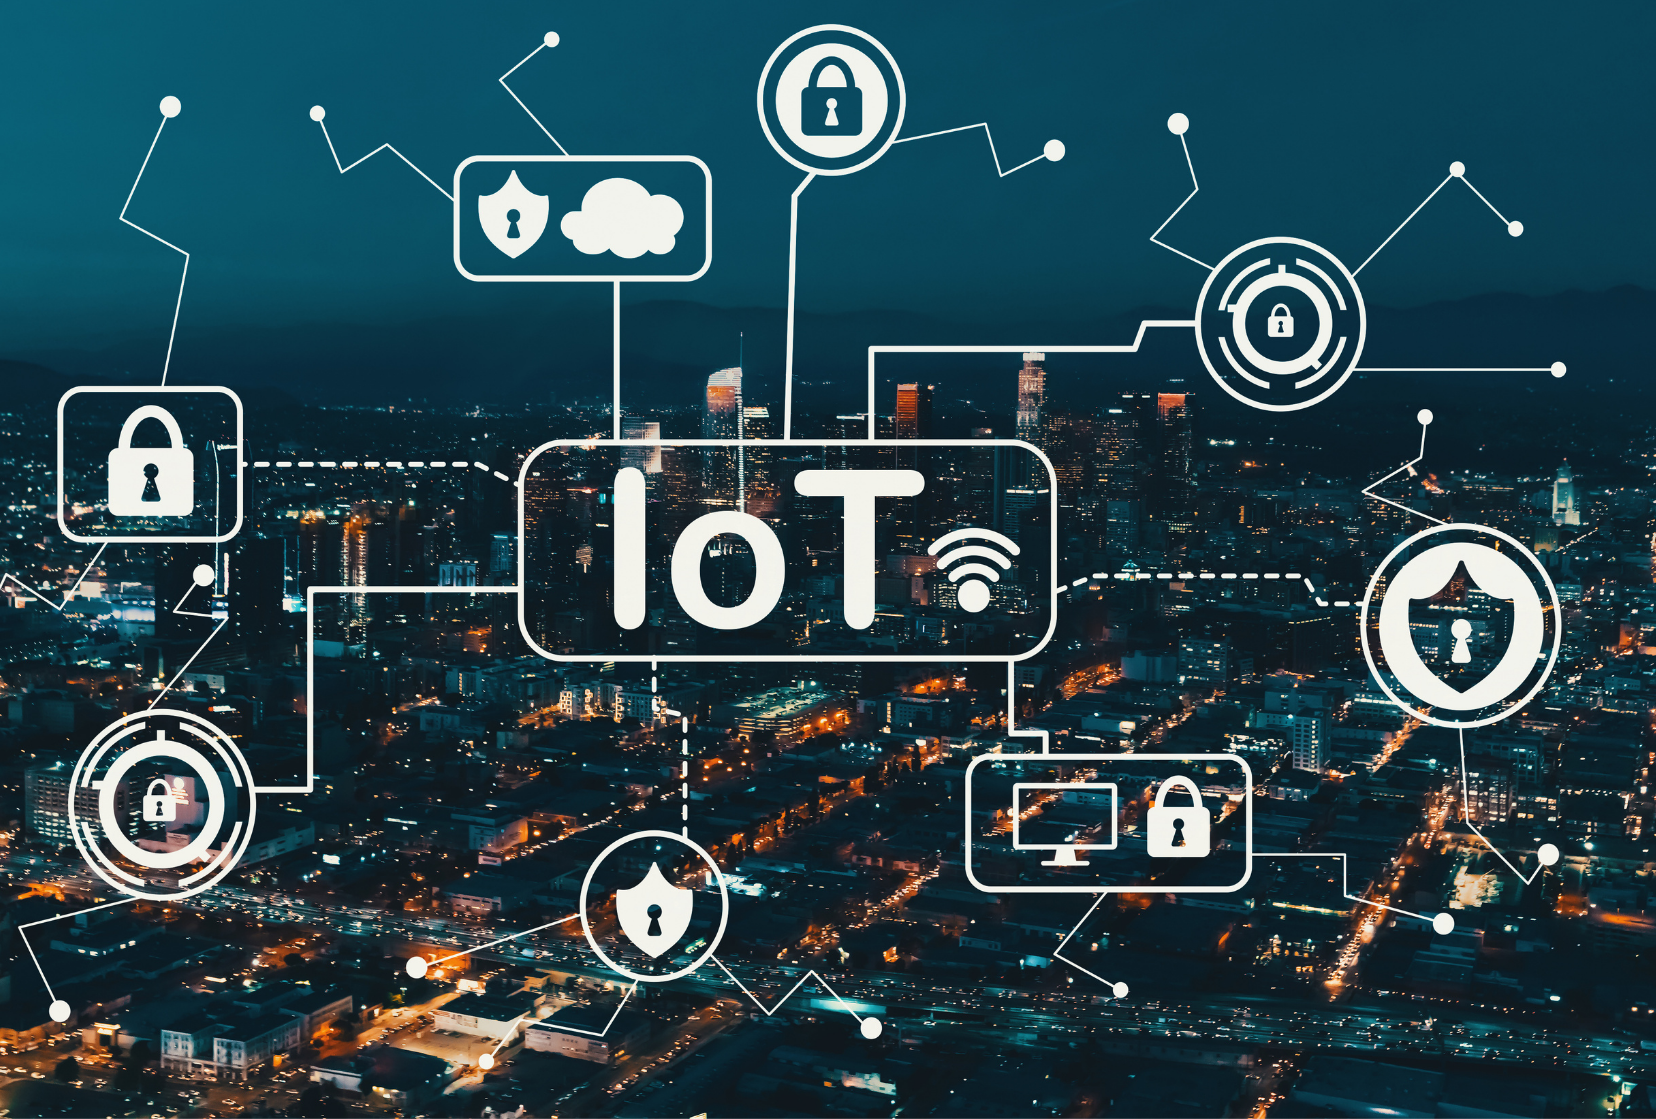 IoT Powered Automation vs Building Management System